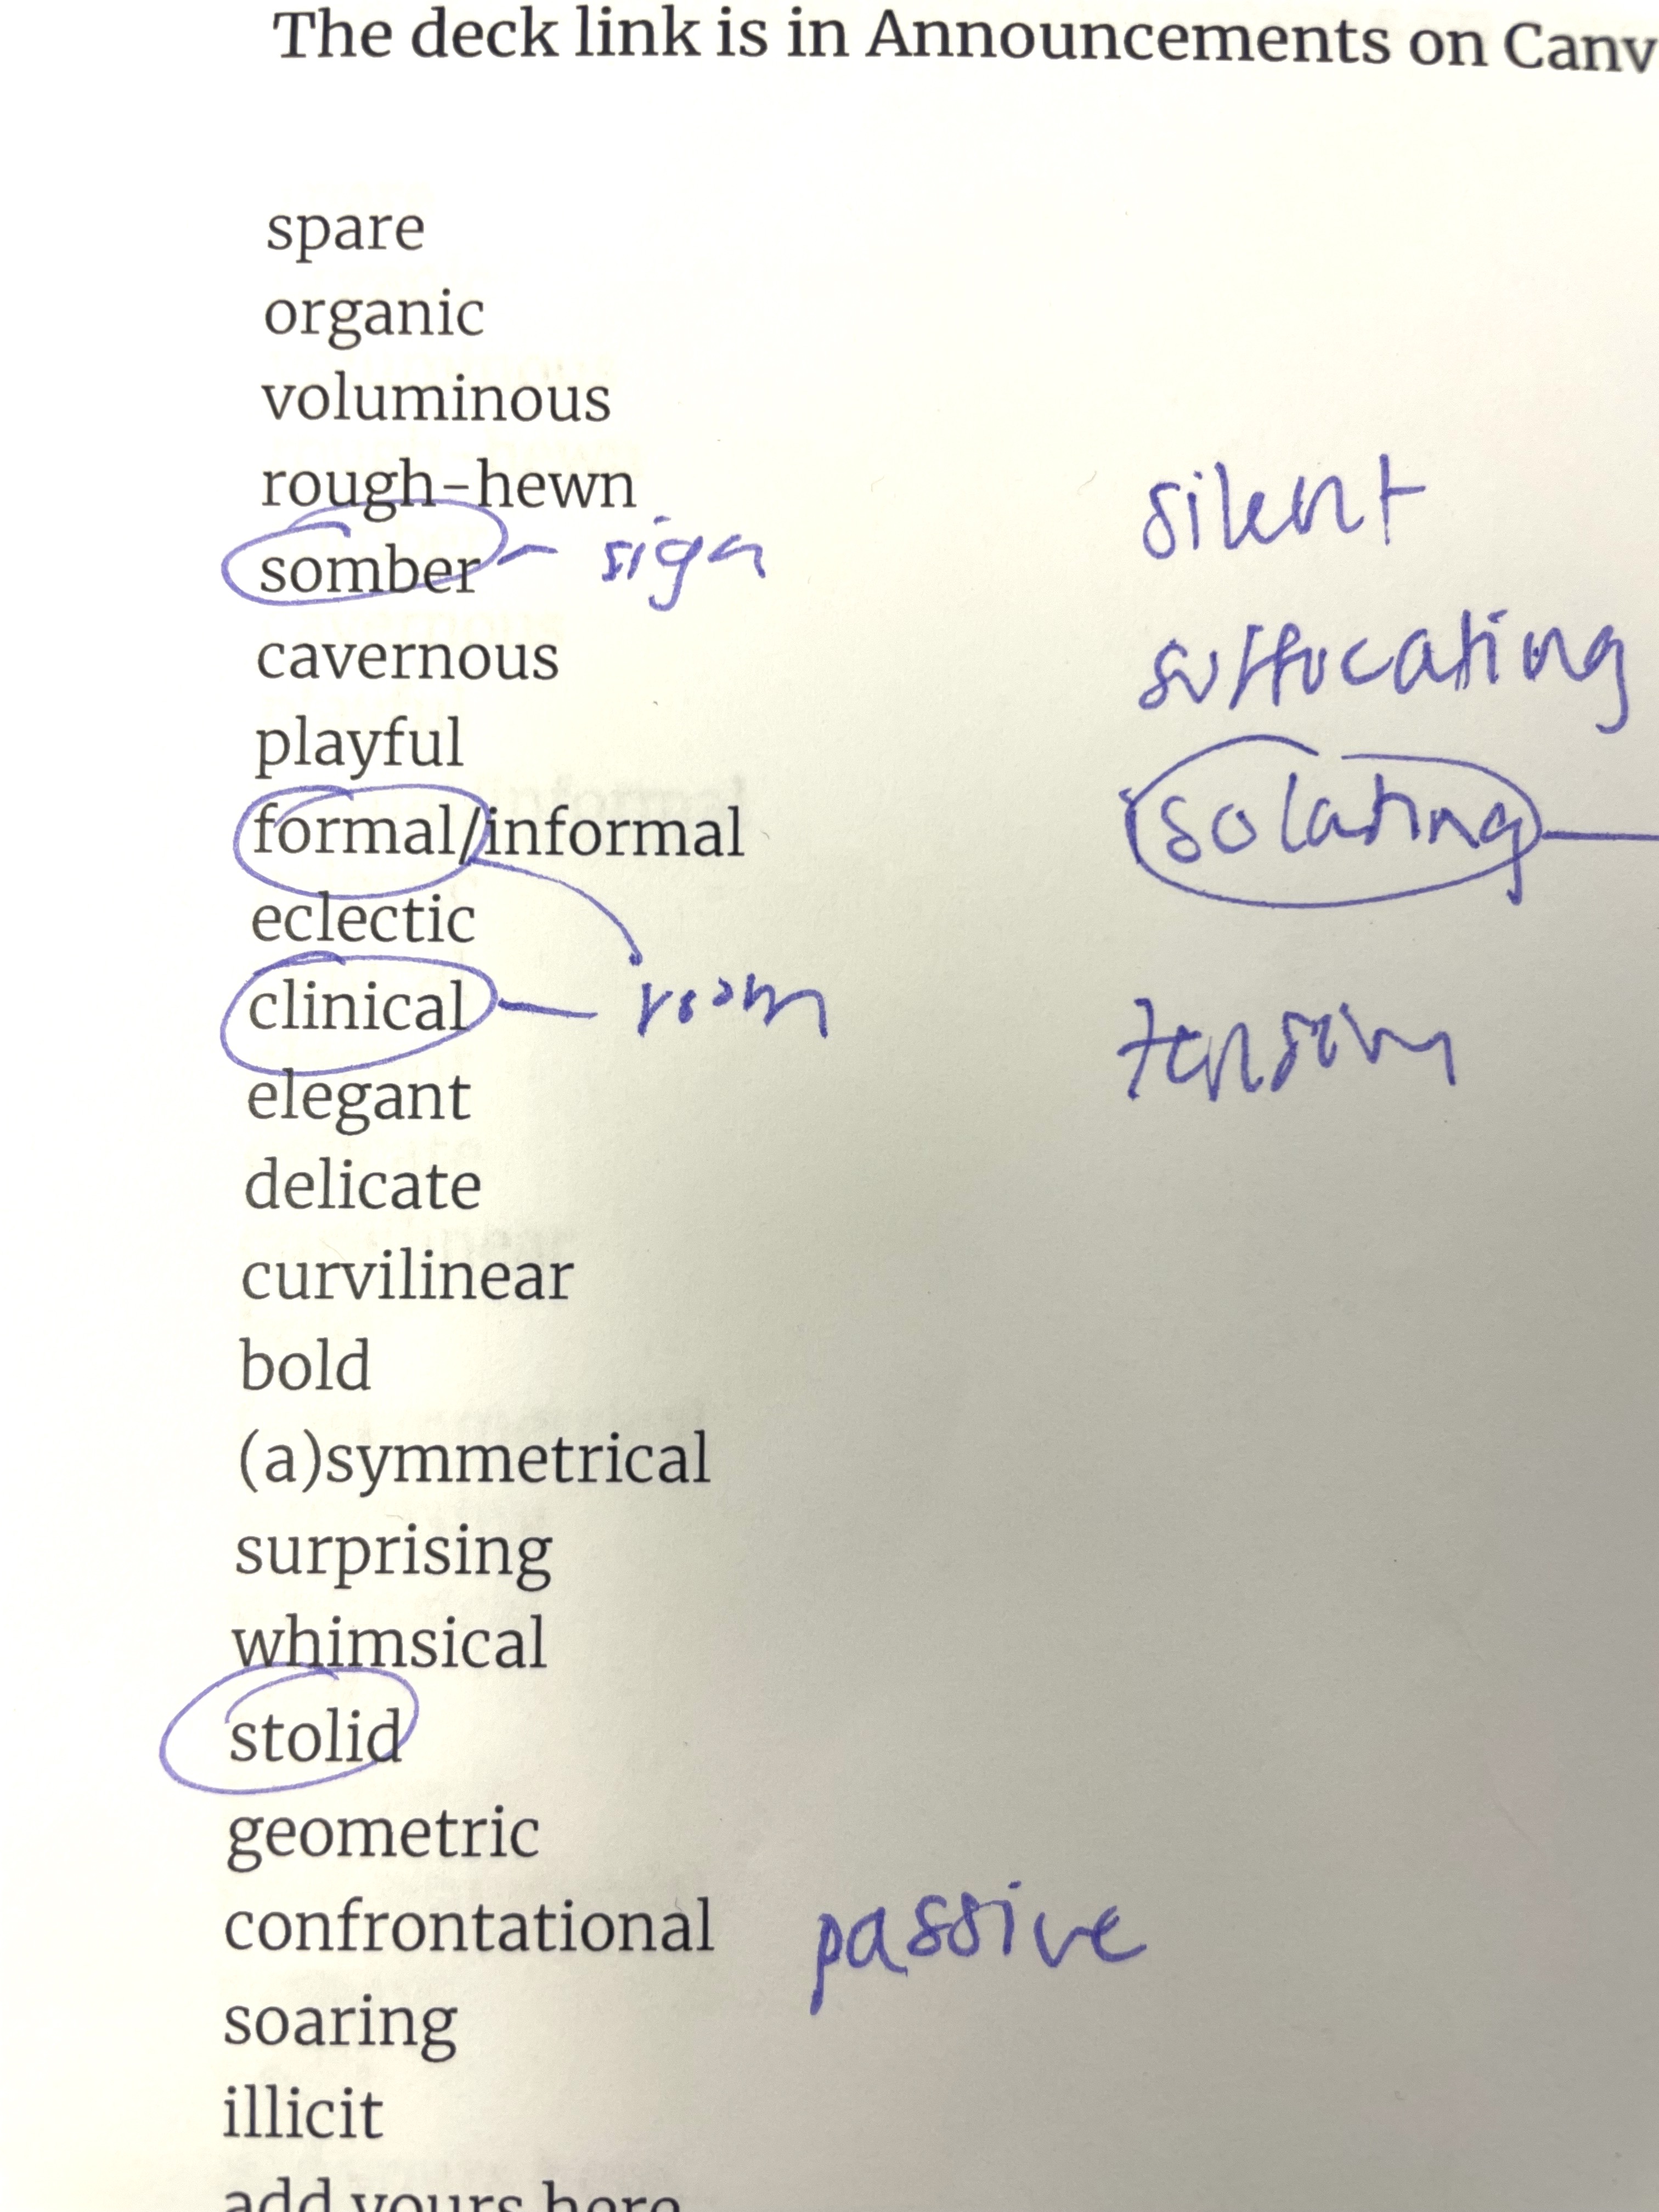 a list of words in a column like "clinical" and "elegant" and "stolid," to which my student has added handwritten circles around some words and her own "silent," "suffocating," and others.jpeg